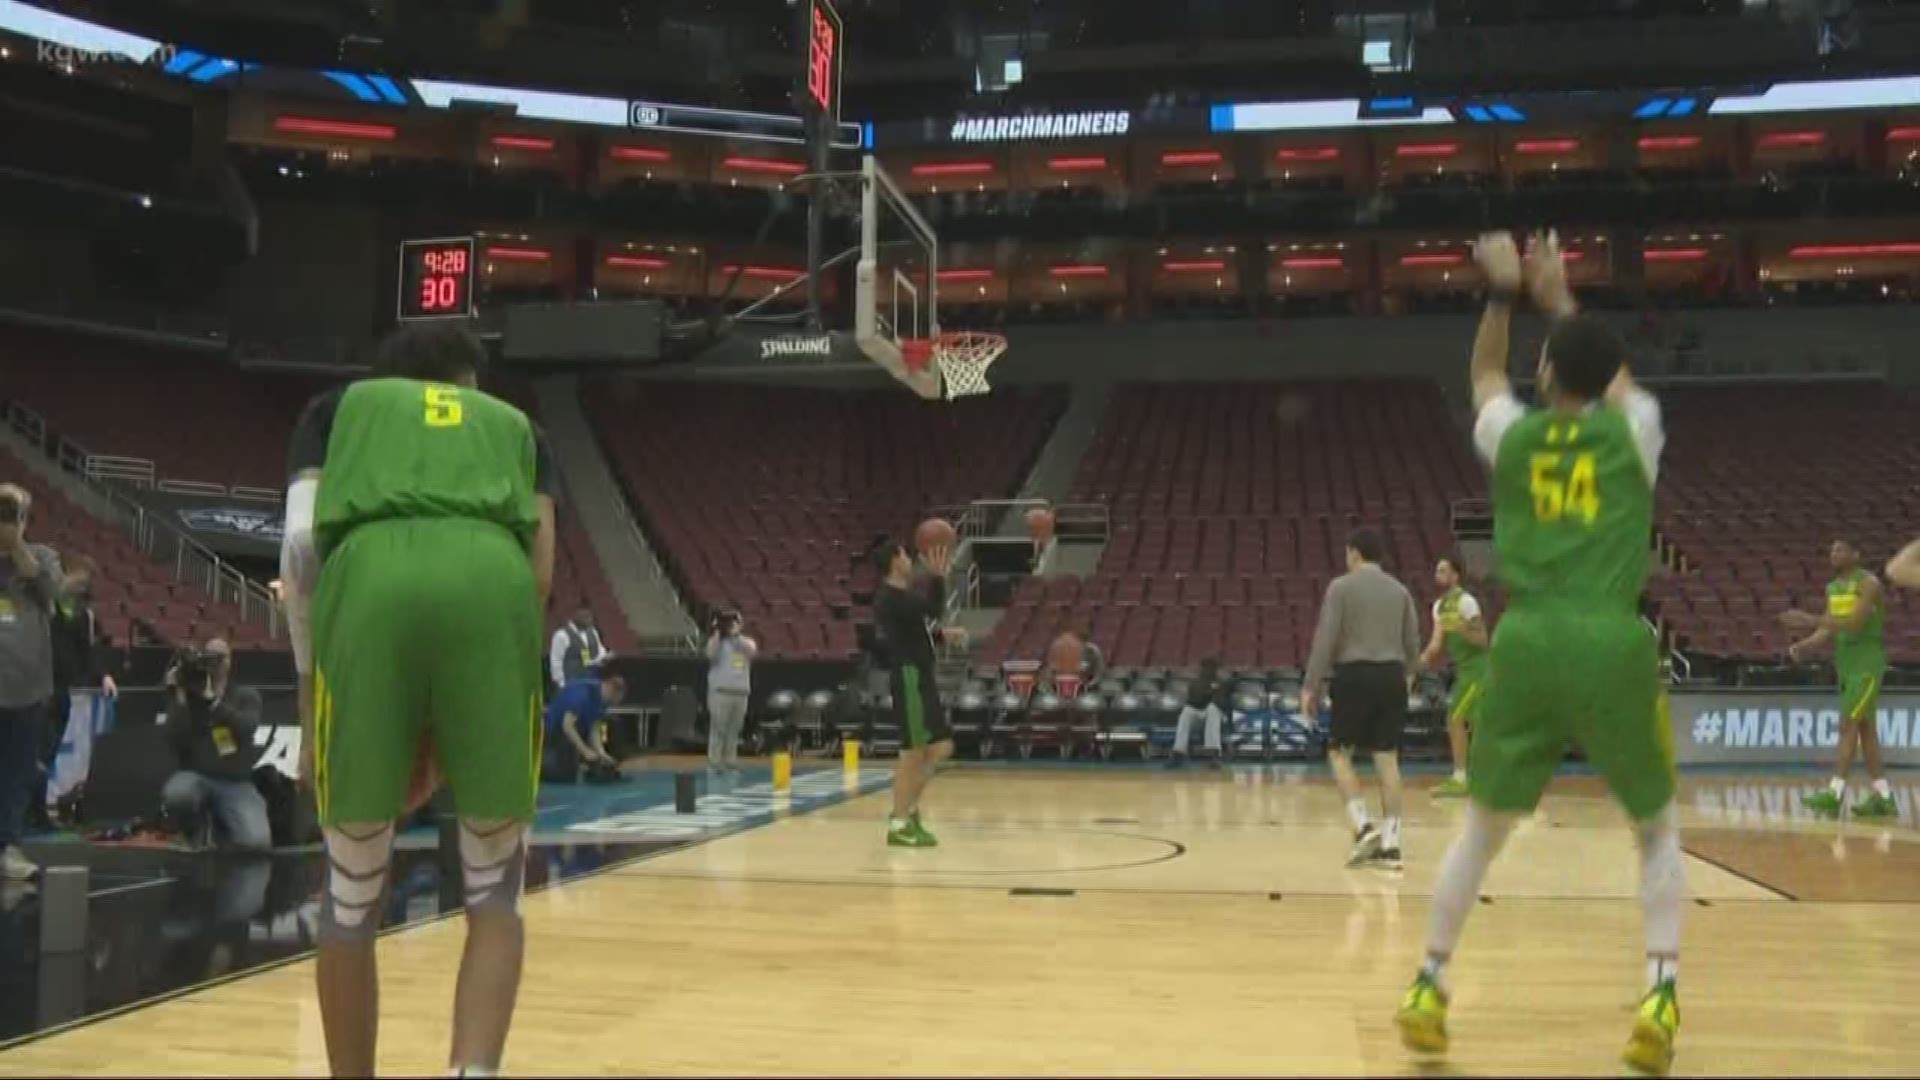 The Ducks are getting used to a big time zone change as they prepare to face Virginia in hopes of making the Elite 8. KGW's Orlando Sanchez is there